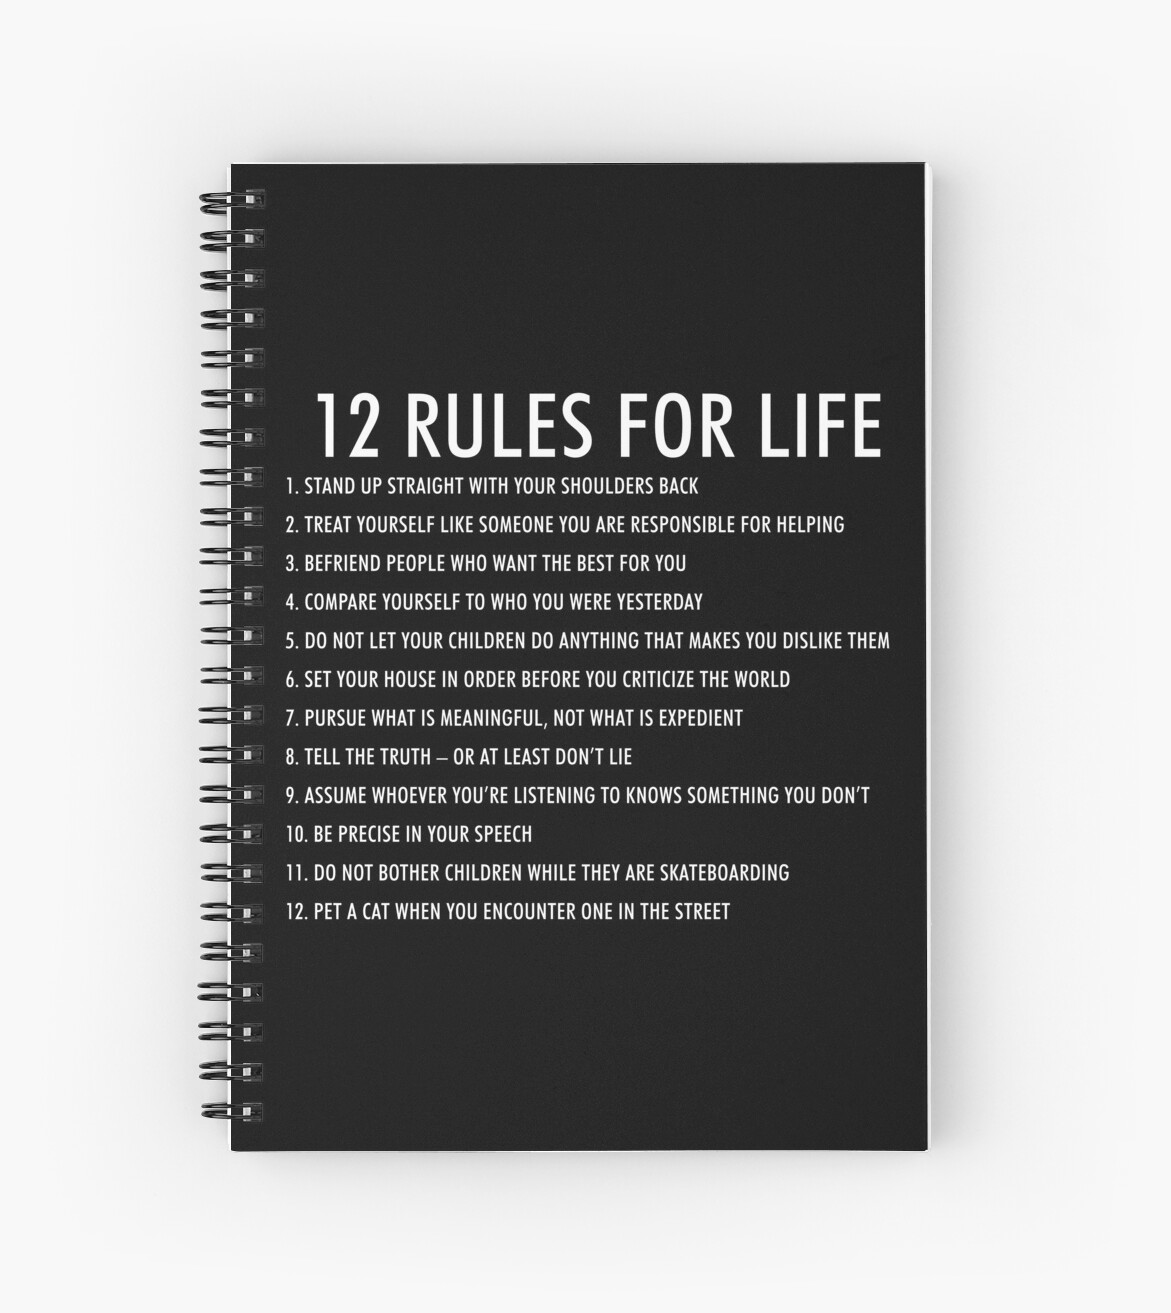 12 rules for life buy